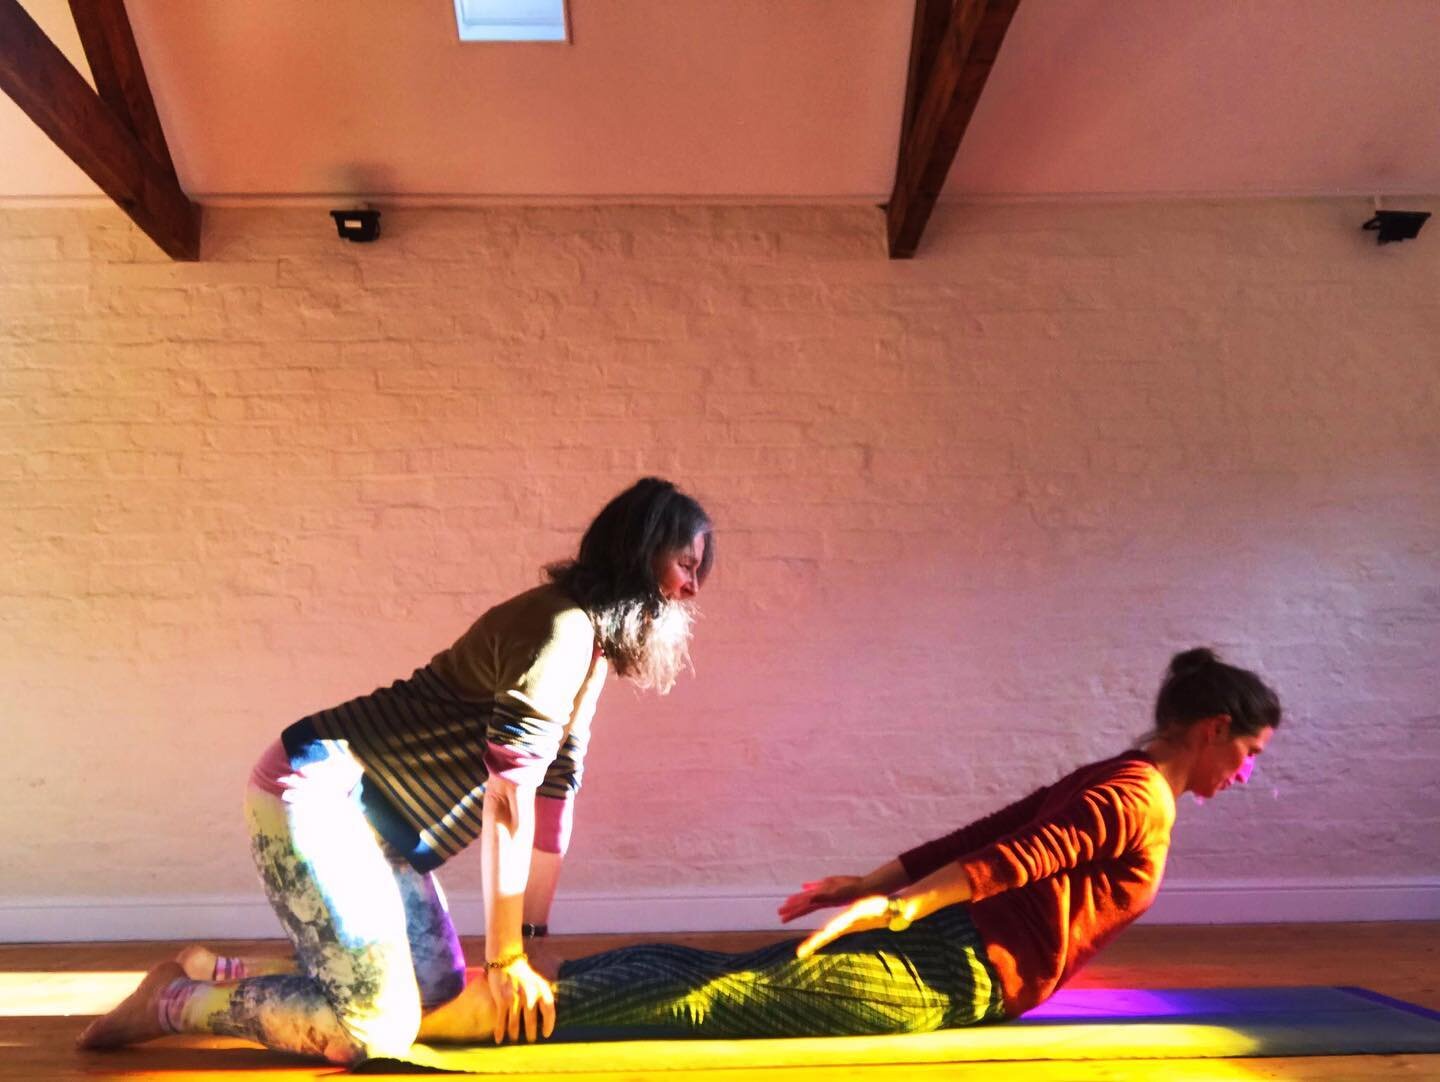 ADJUSTMENTS 
Yesterday Sophie and I taught a yoga adjustments workshop @stablesyoga studio. Over the last few years with increased awareness around consent, scandals in the yoga world and in the wake of the &lsquo;me too&rsquo; movement and covid, ha